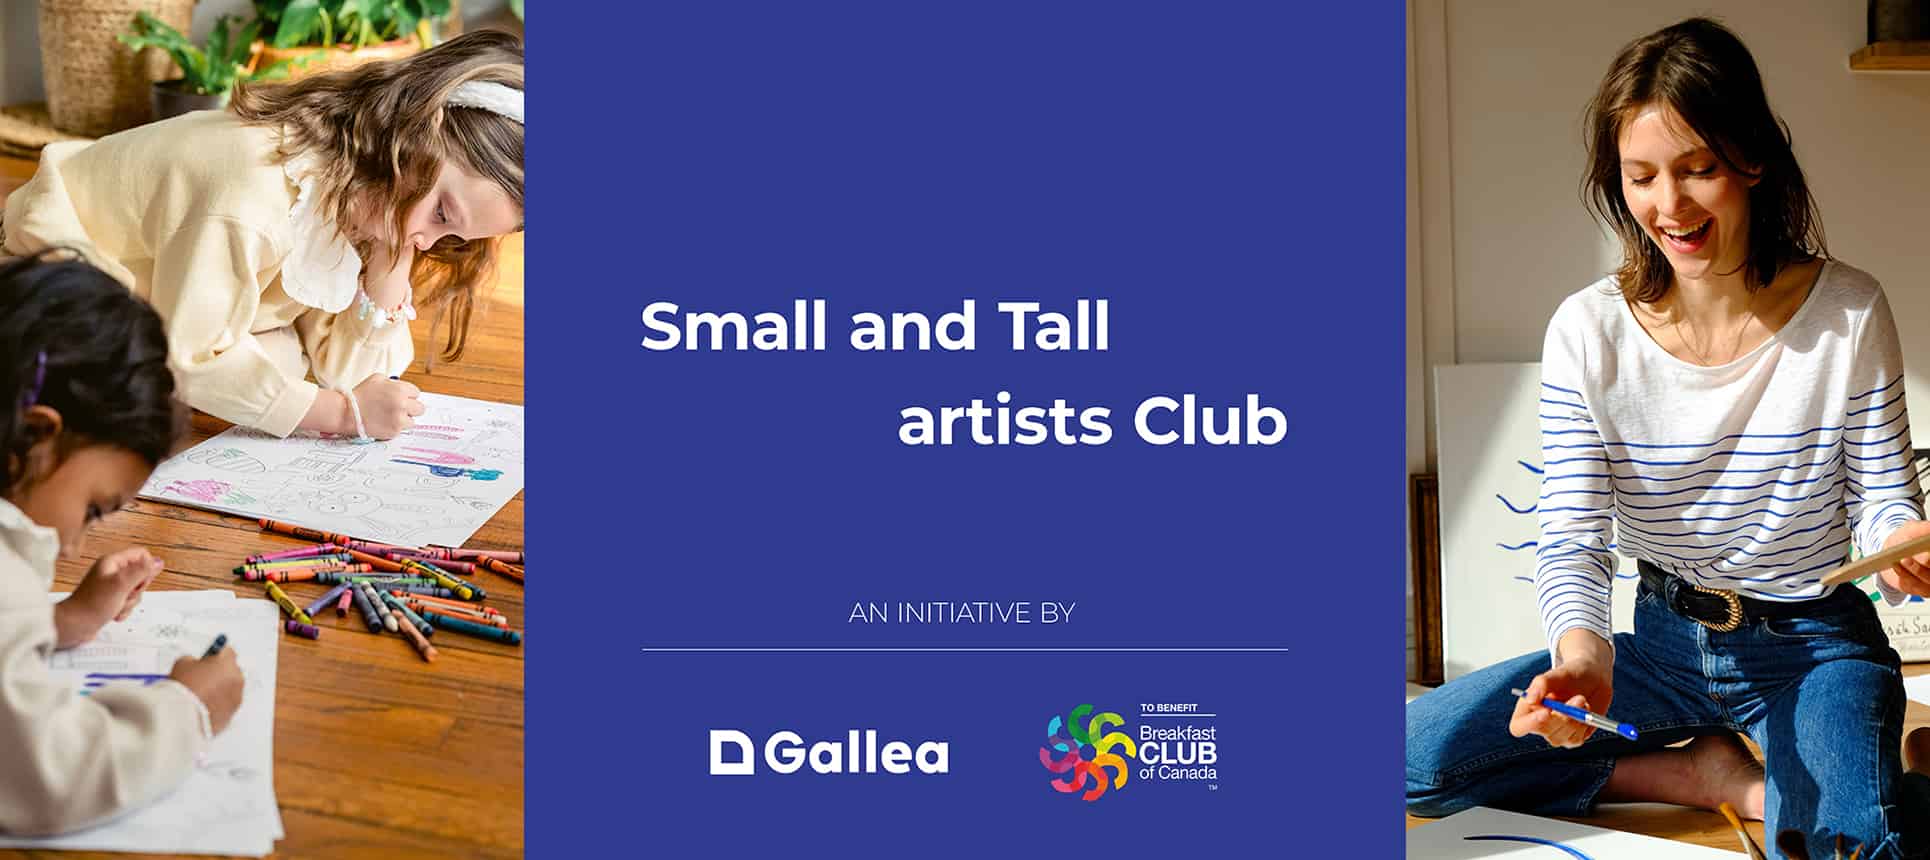 Small and Tall artist Club